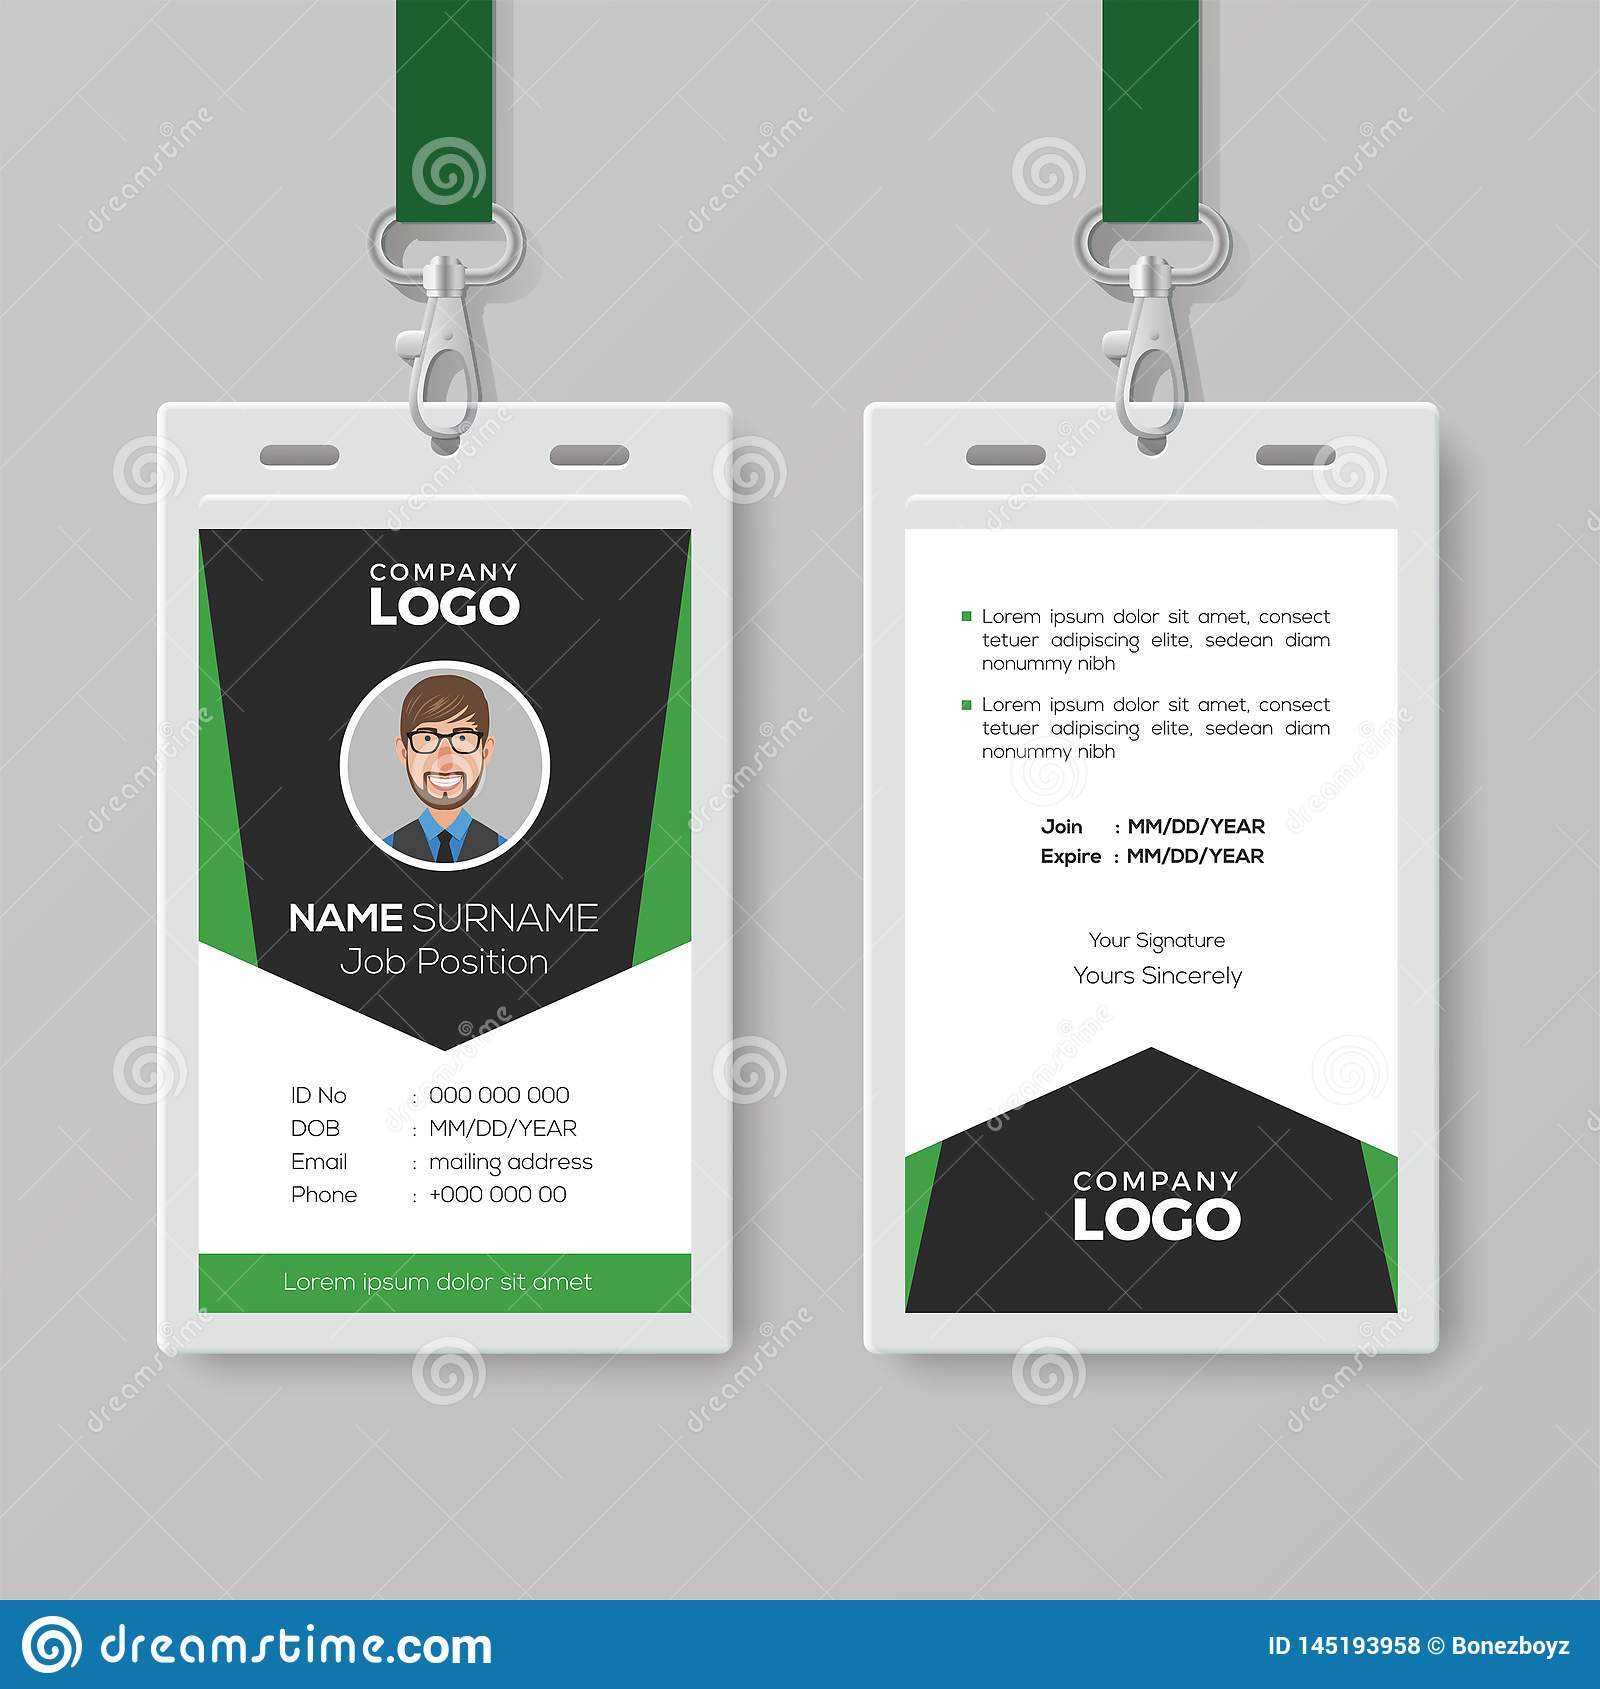 Creative Corporate Id Card Template With Green Details Stock With Regard To Work Id Card Template